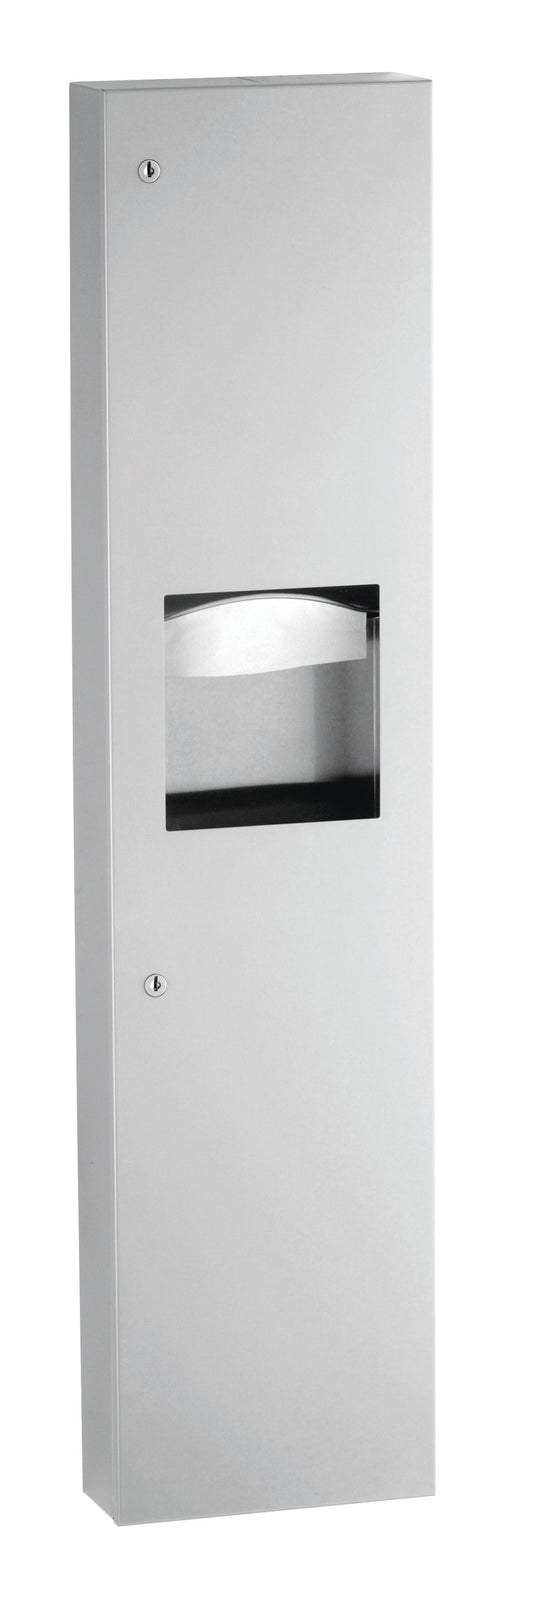 The 380349 surface-mounted paper towel dispenser and waste receptacle from Bobrick in its satin finish.